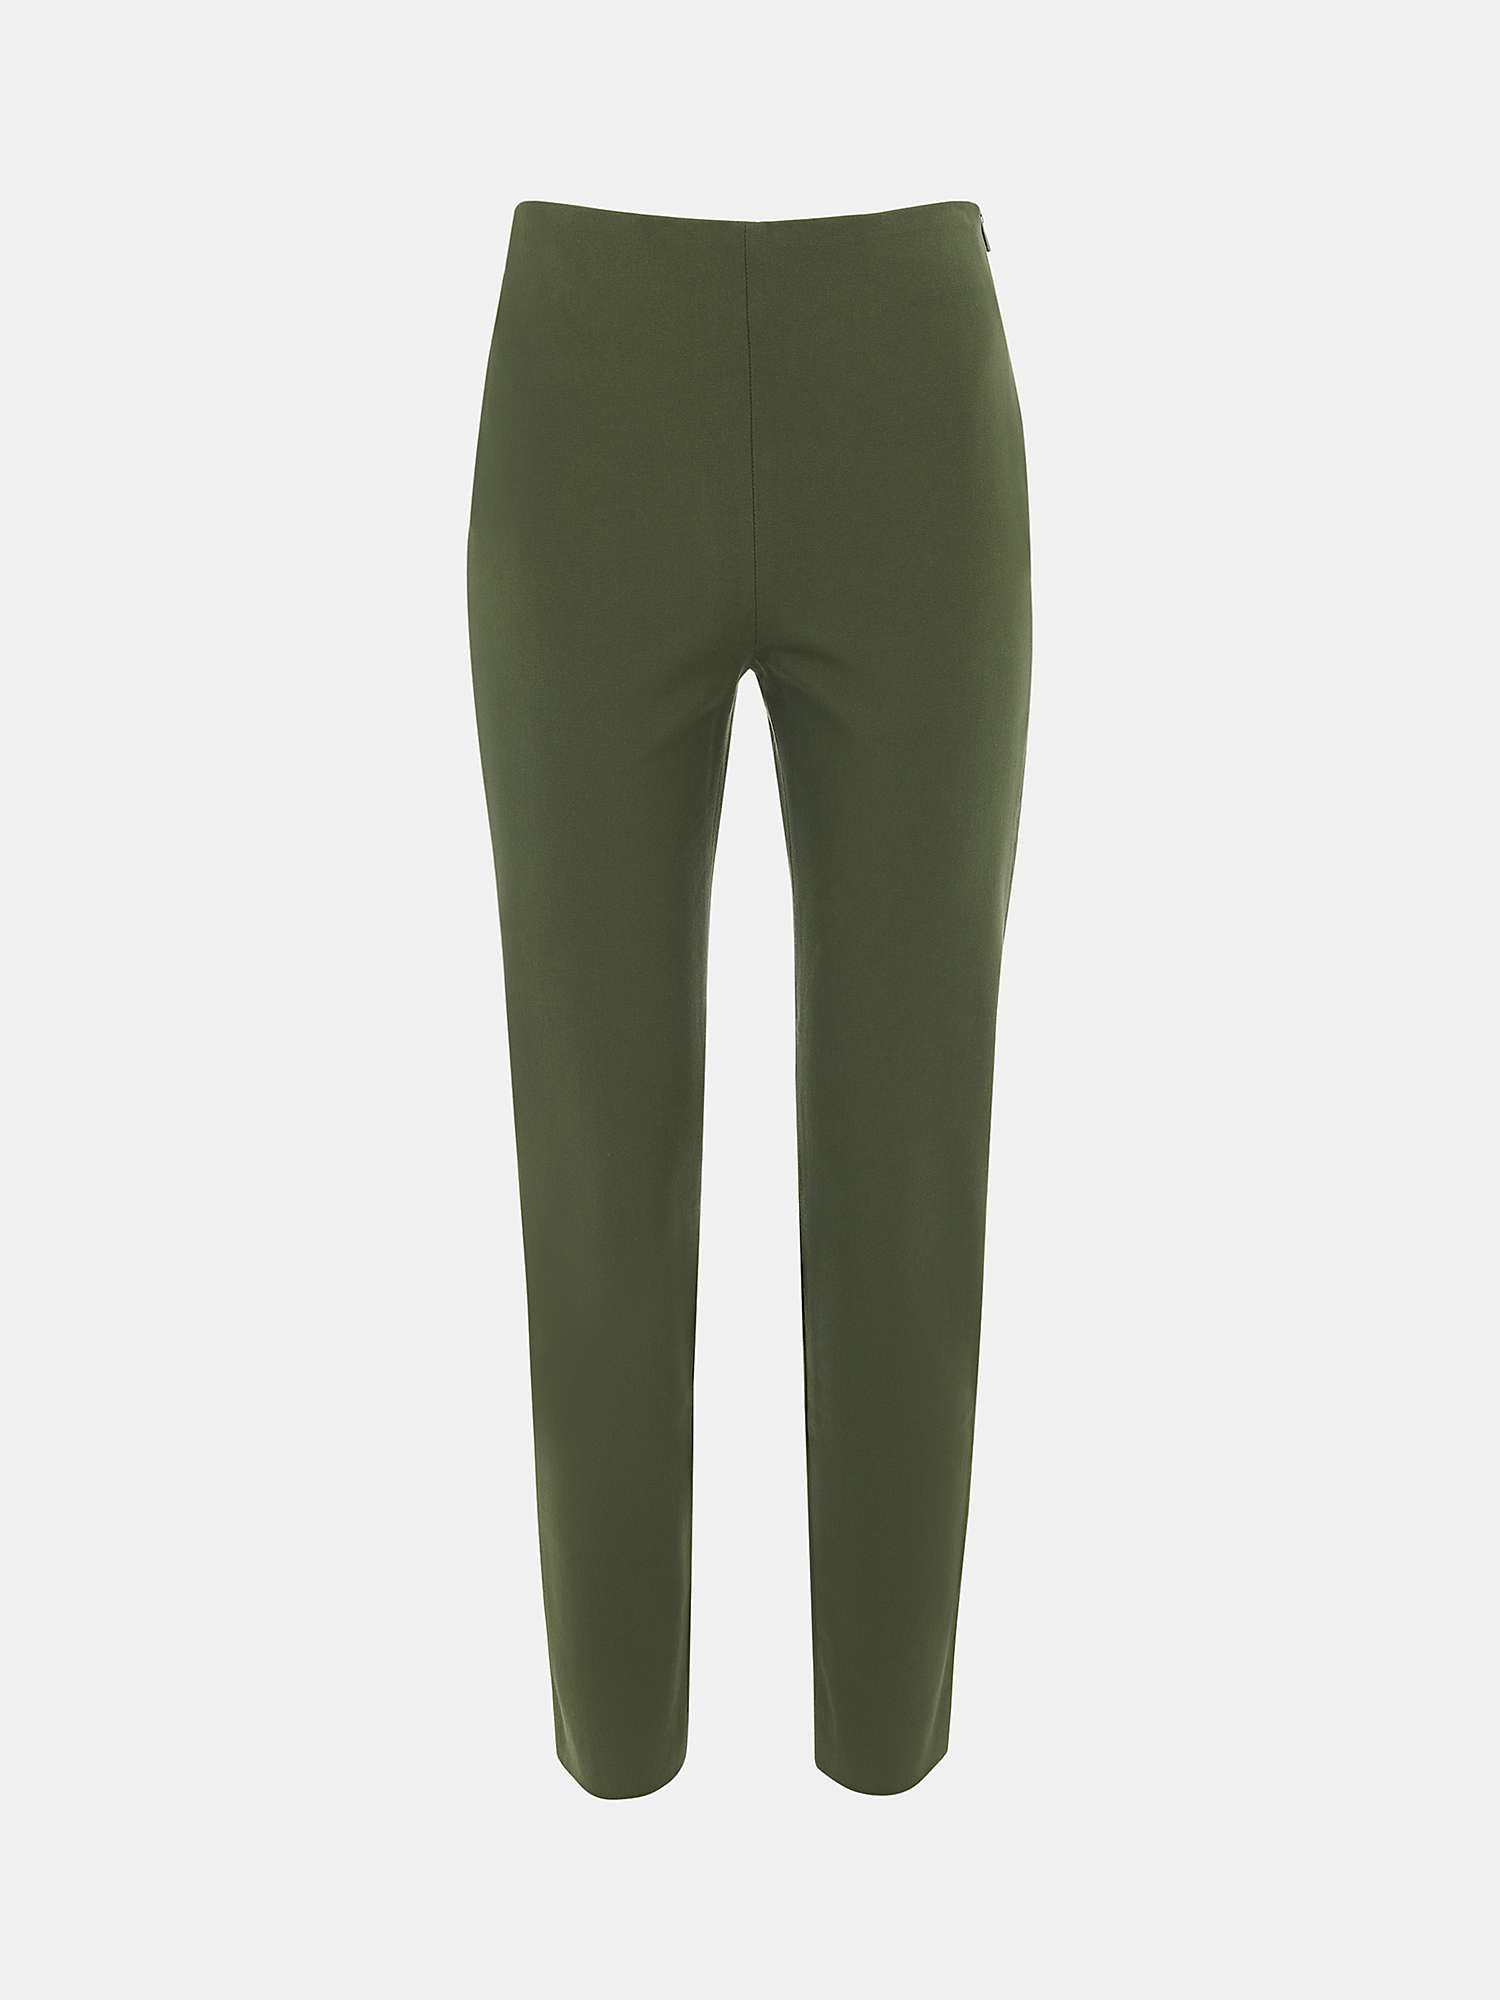 Buy Whistles Petite Super Stretch Trousers Online at johnlewis.com